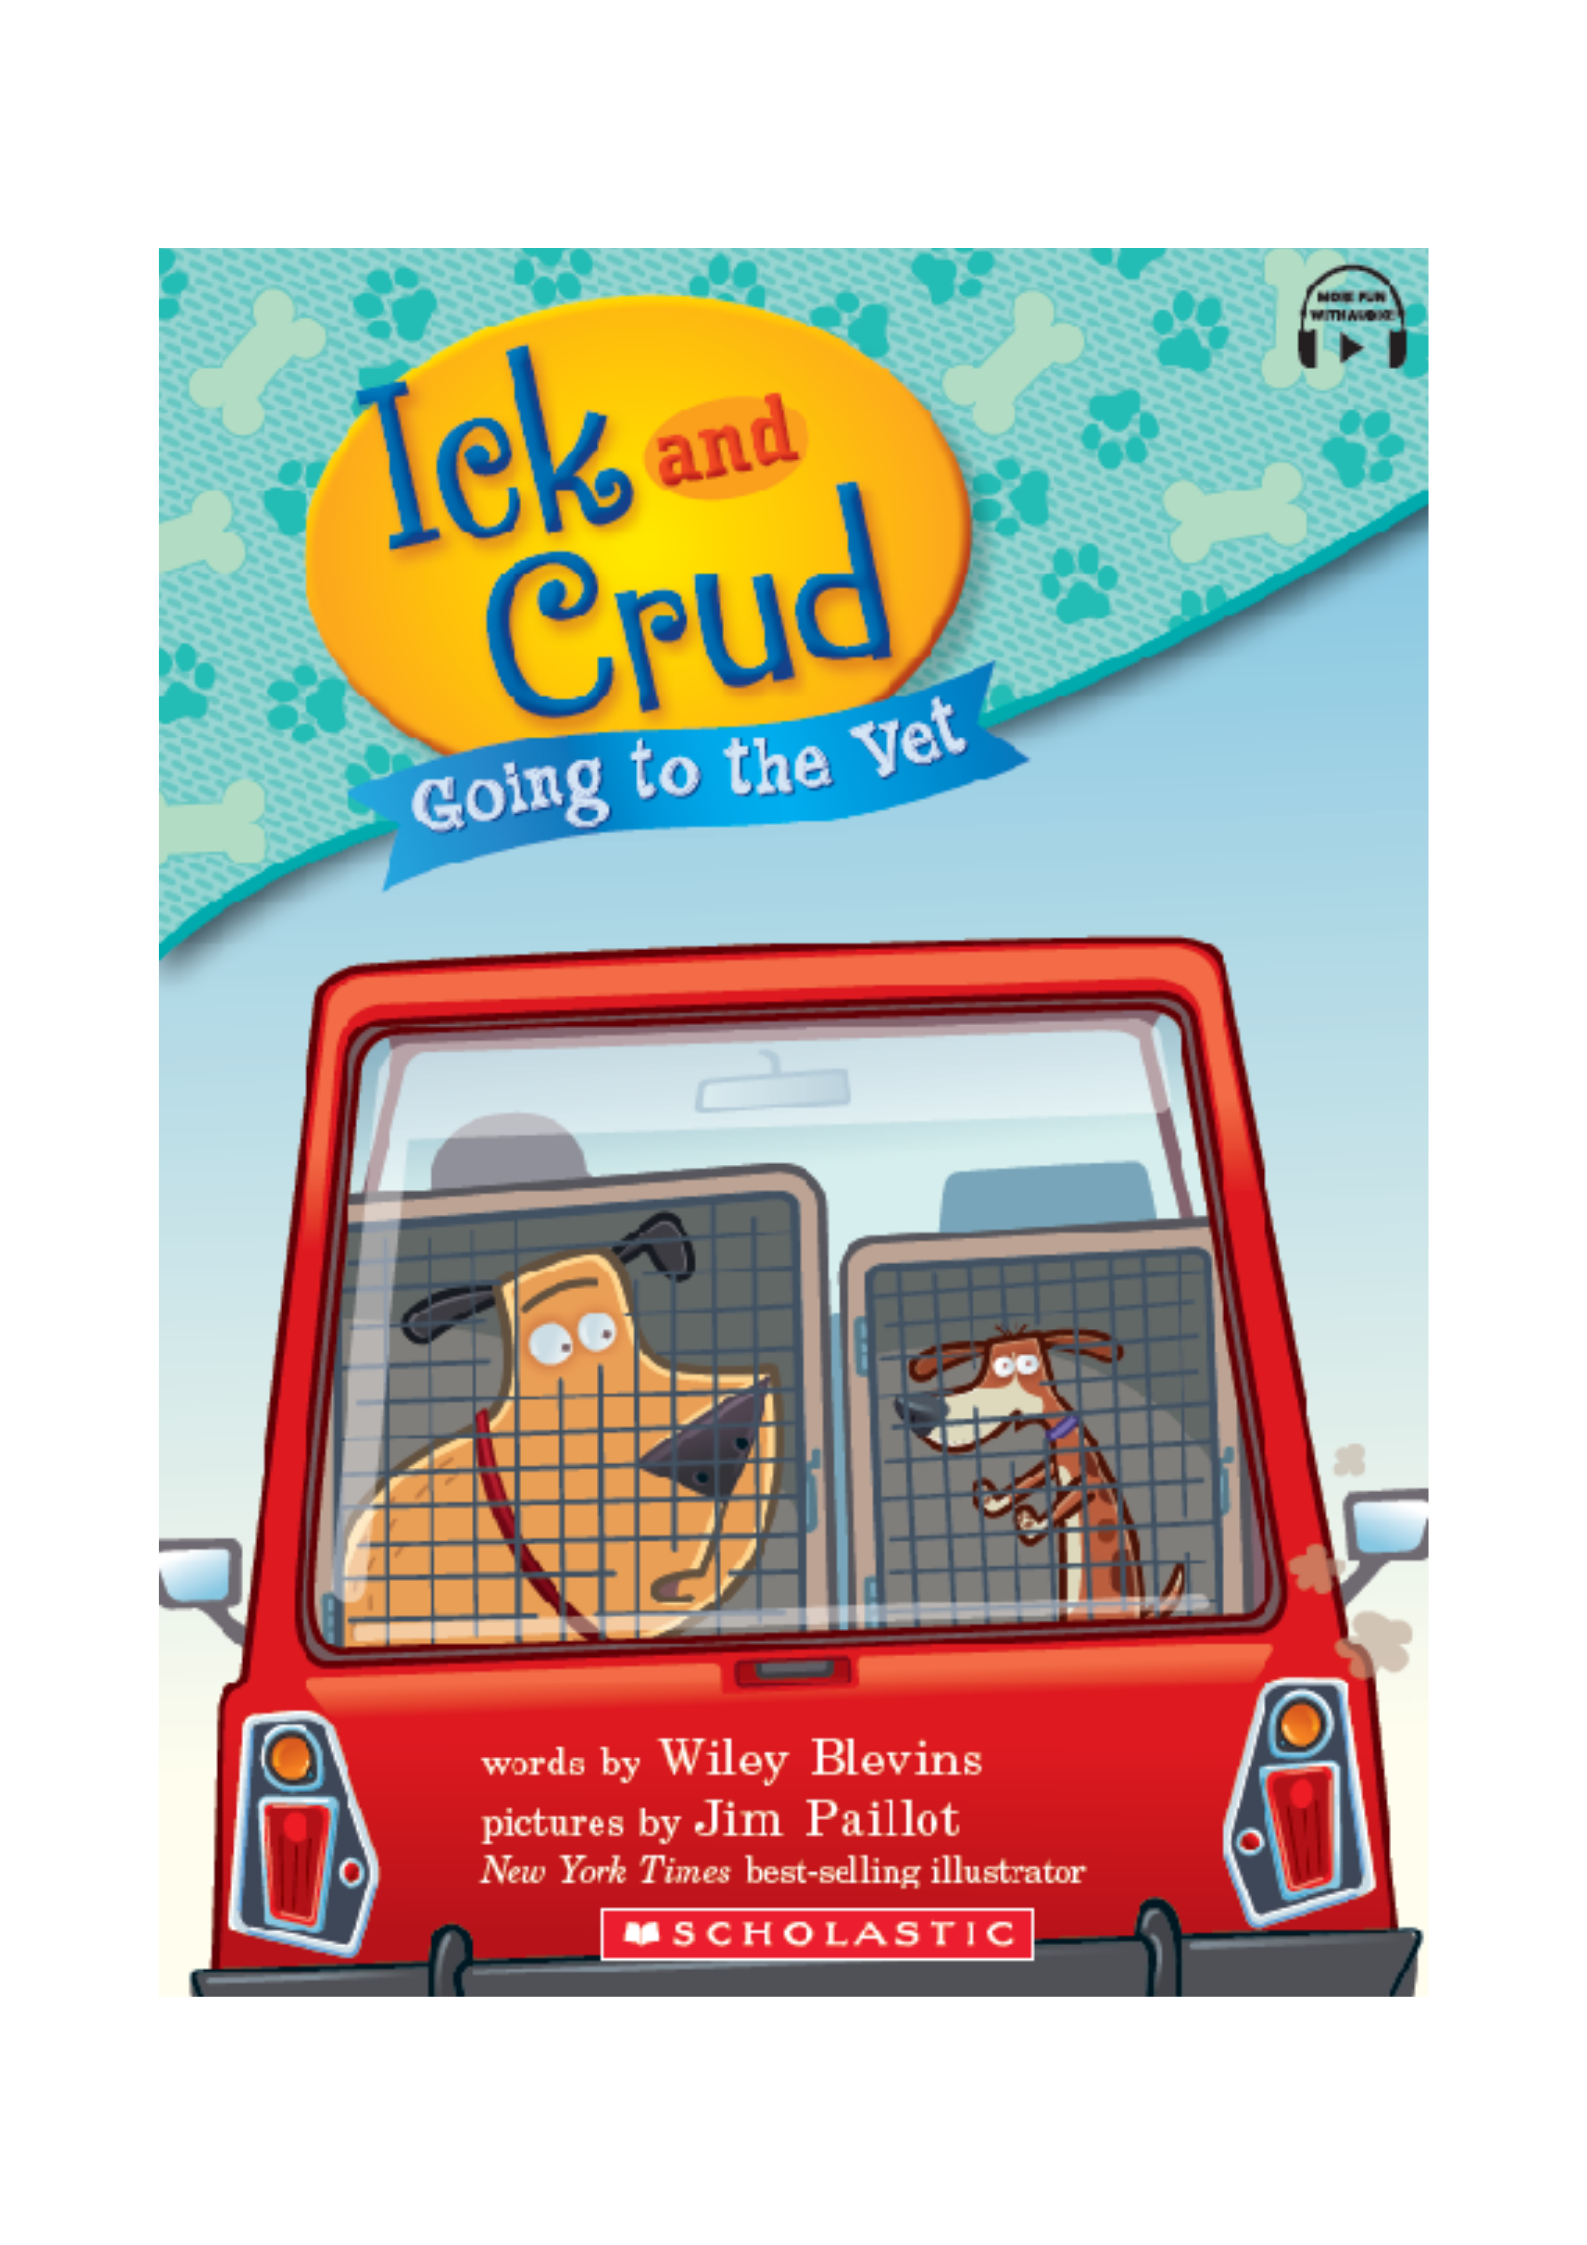 Ick & Crud: Going to the Vet